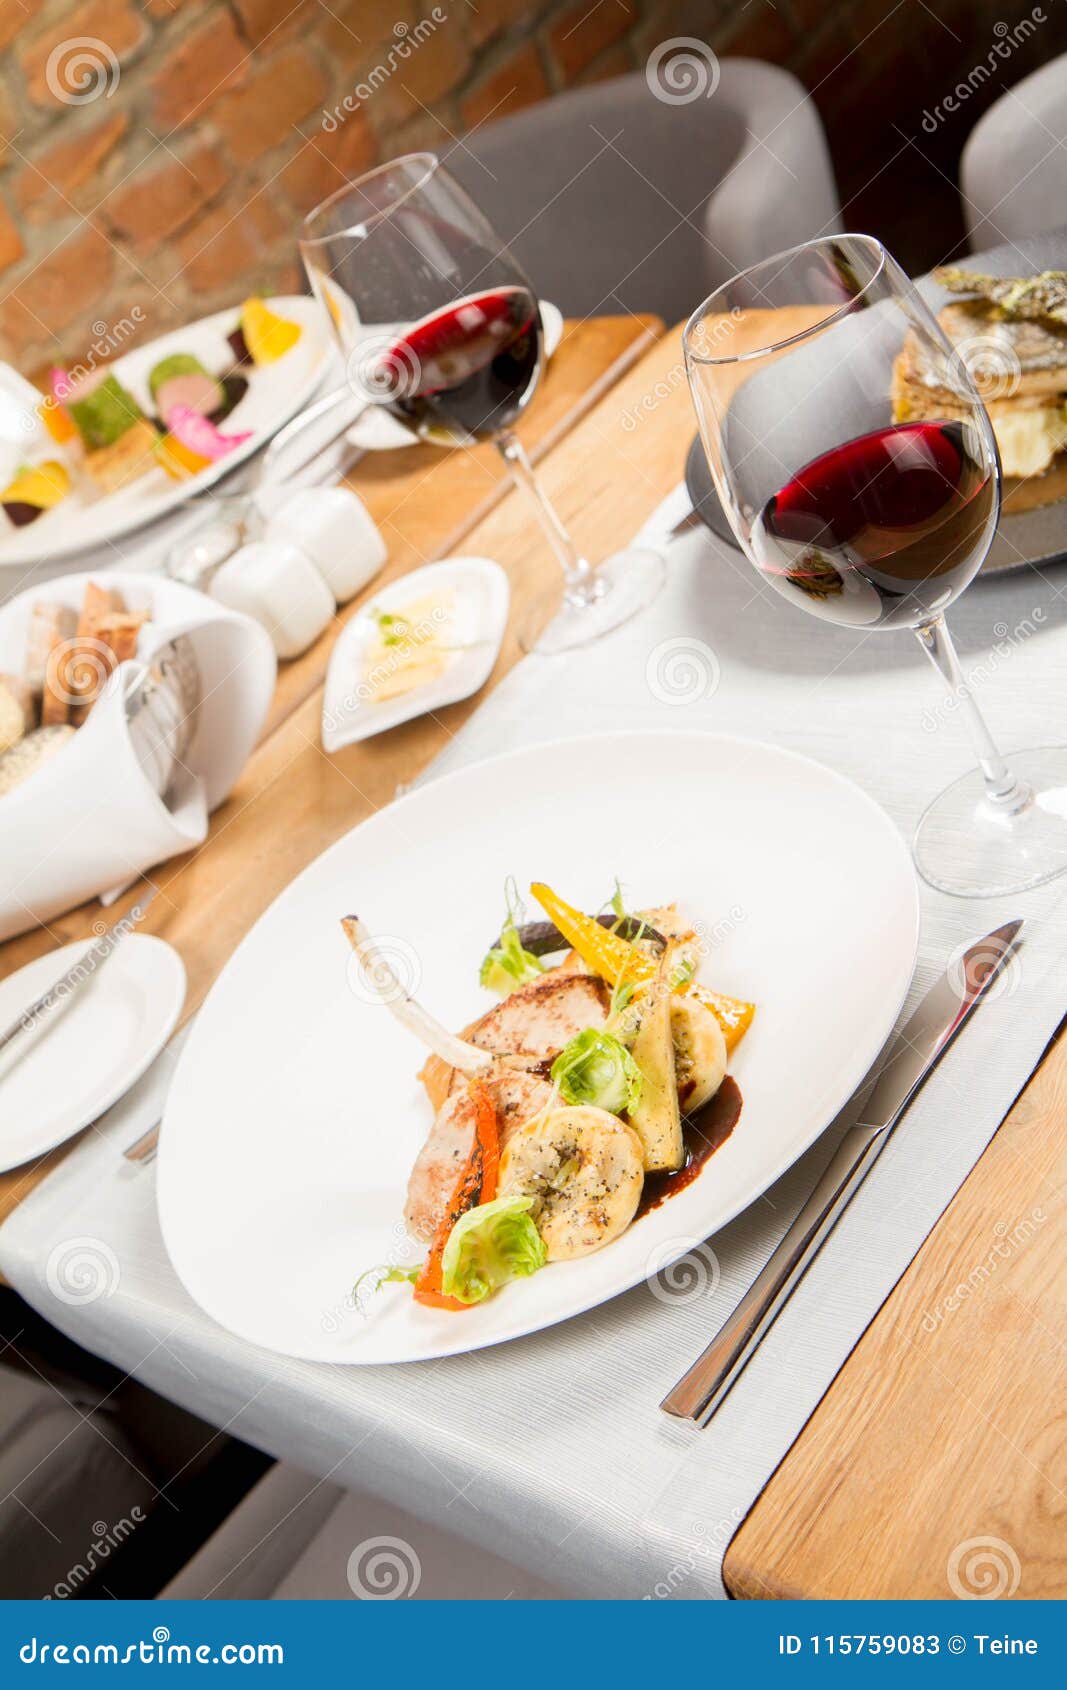 Dishes Served in a Restaurant Stock Image - Image of cuisine, cutlery ...